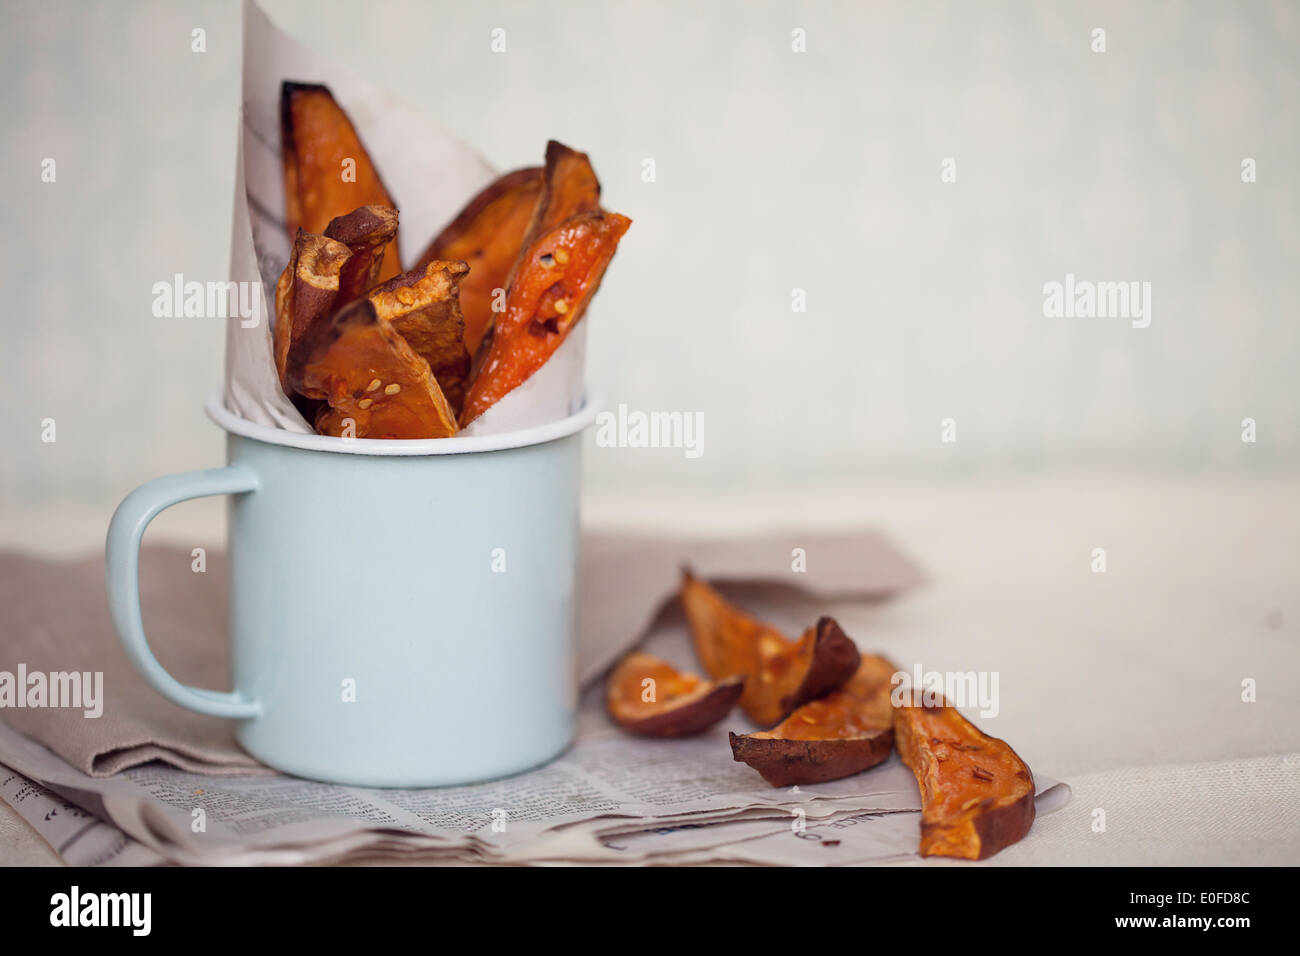 Sweet Potato Wedges with Chilli in a serving cup Stock Photo